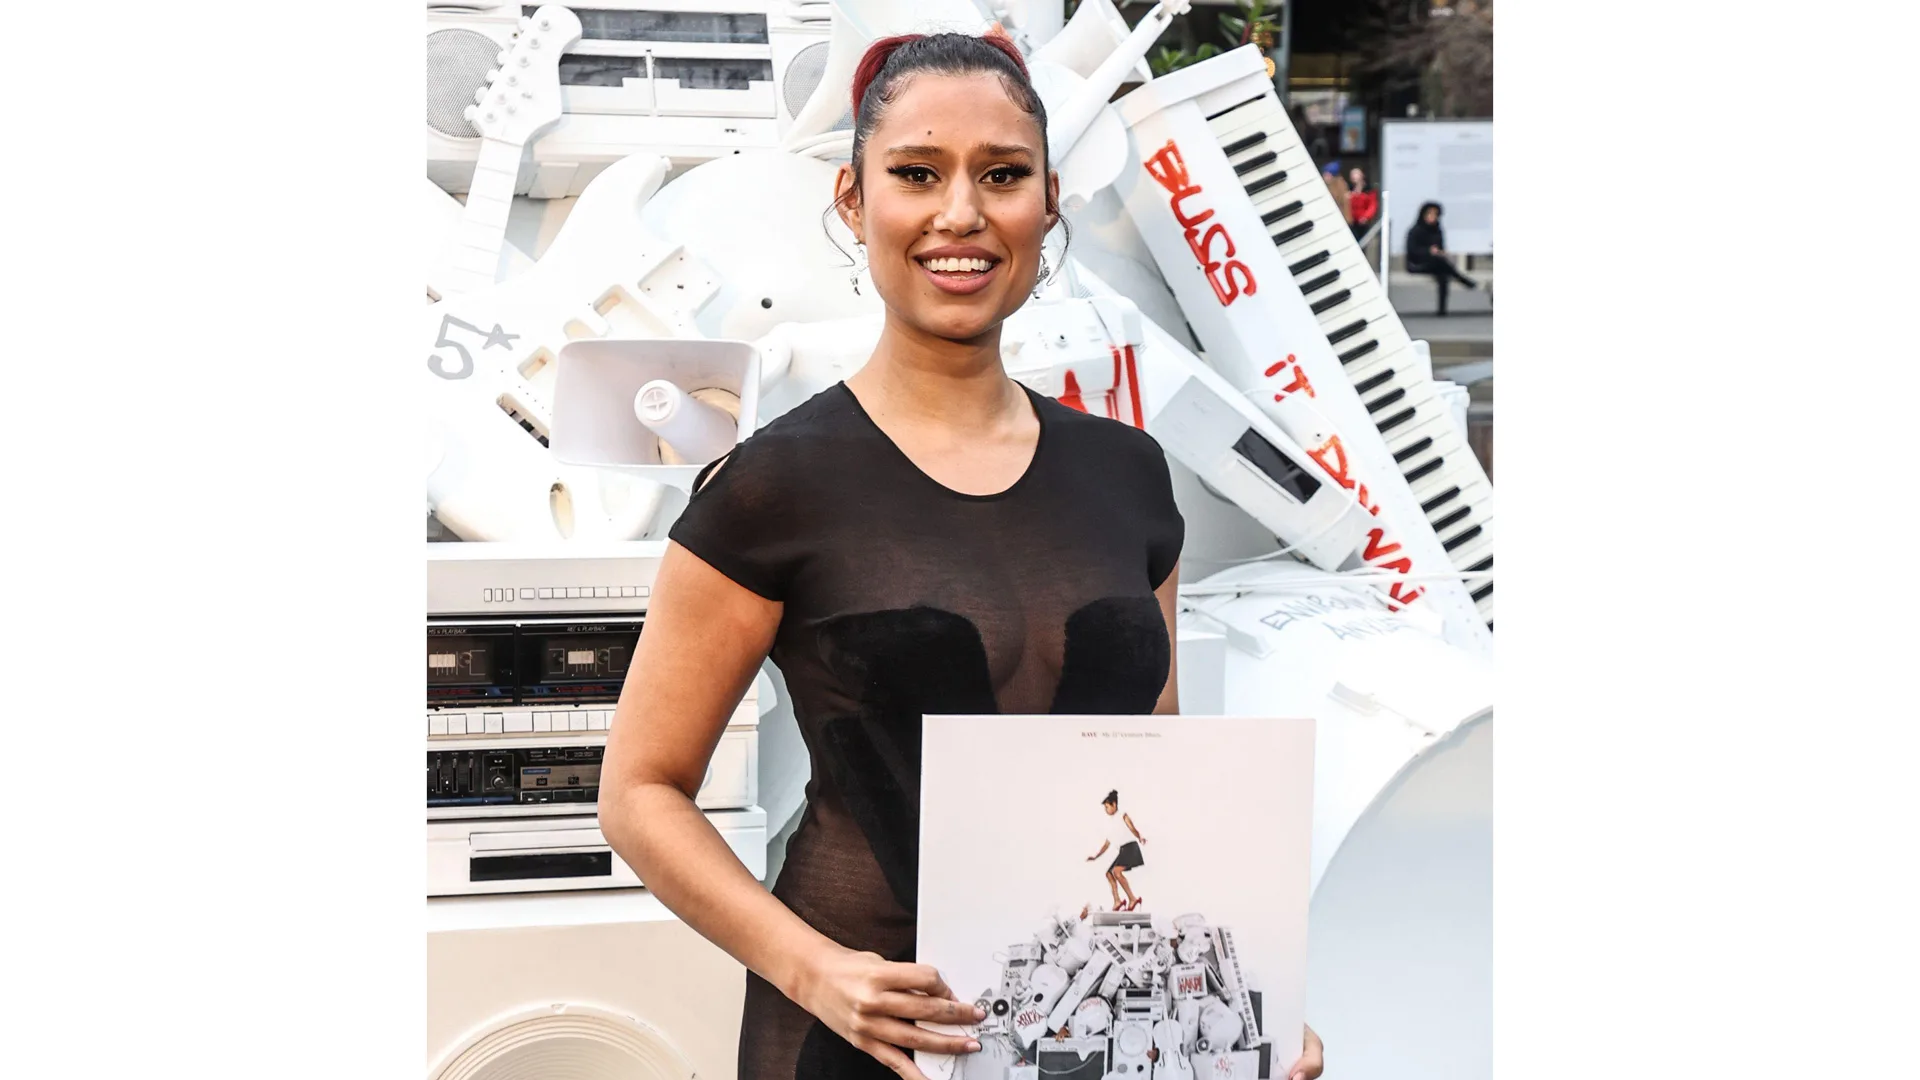 A photograph of the singer Raye holding up her debut album against a background of music related sculptures